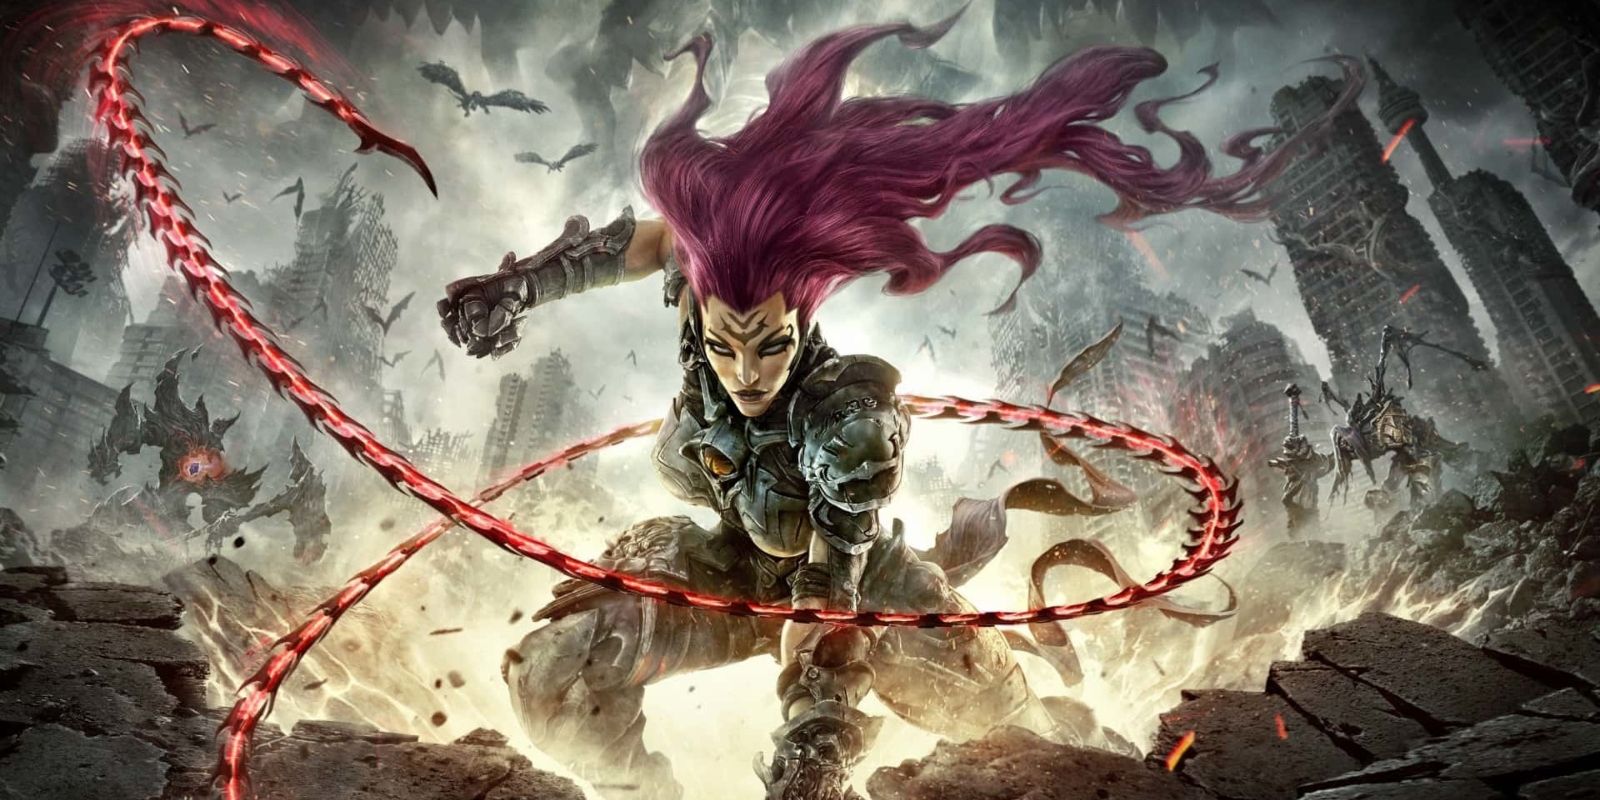 Fury On the Cover of Darksiders 3